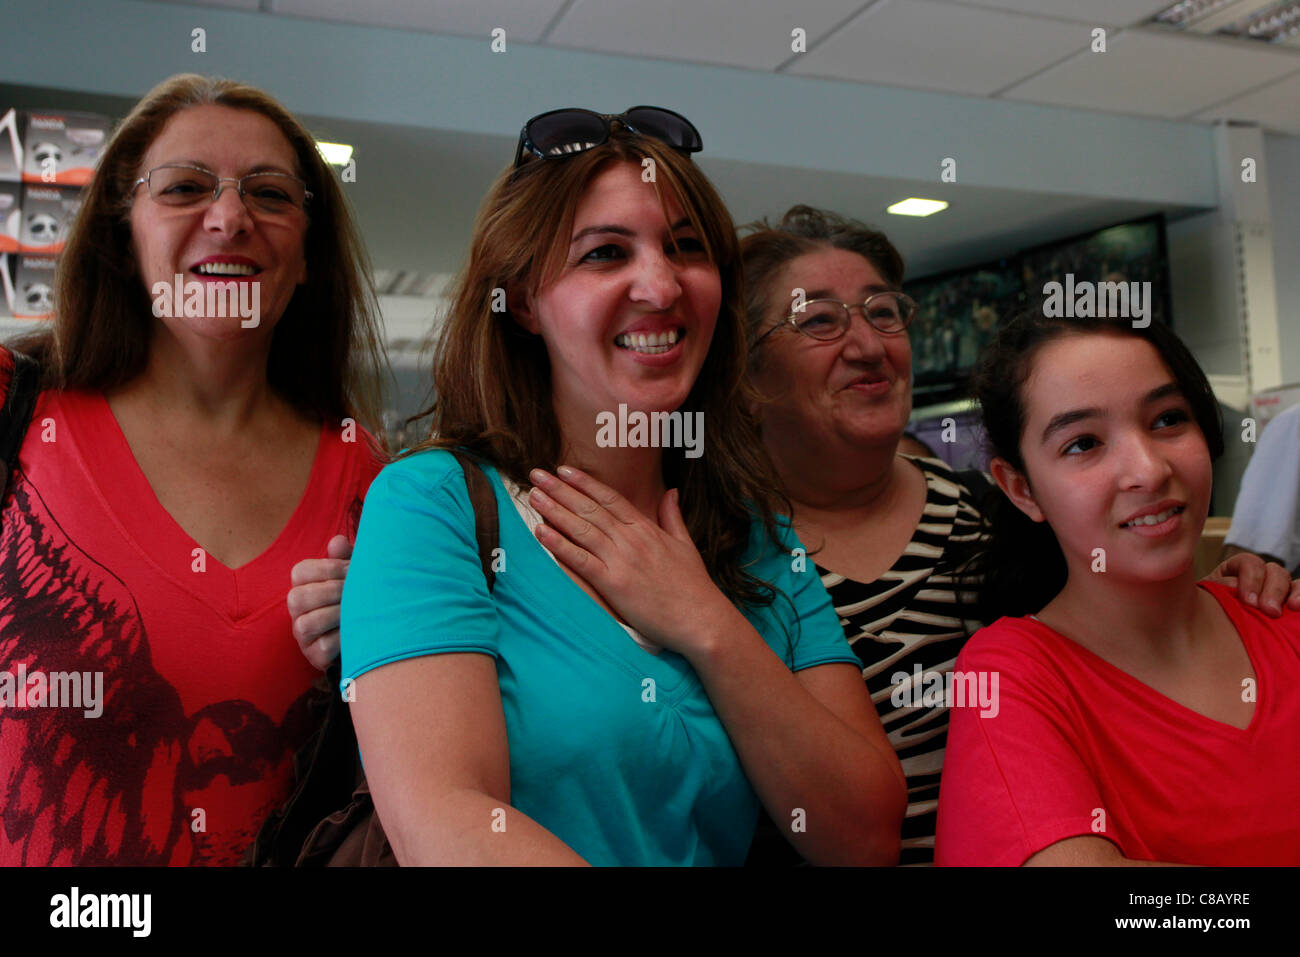 Israeli women in a warehouse shop reacting to a television broadcast of first pictures of Israeli soldier Gilad Schalit freed in prisoner swap deal on 18 October 2011. The Islamist group Hamas has freed Israeli soldier Gilad Shalit from more than five years in captivity. Stock Photo